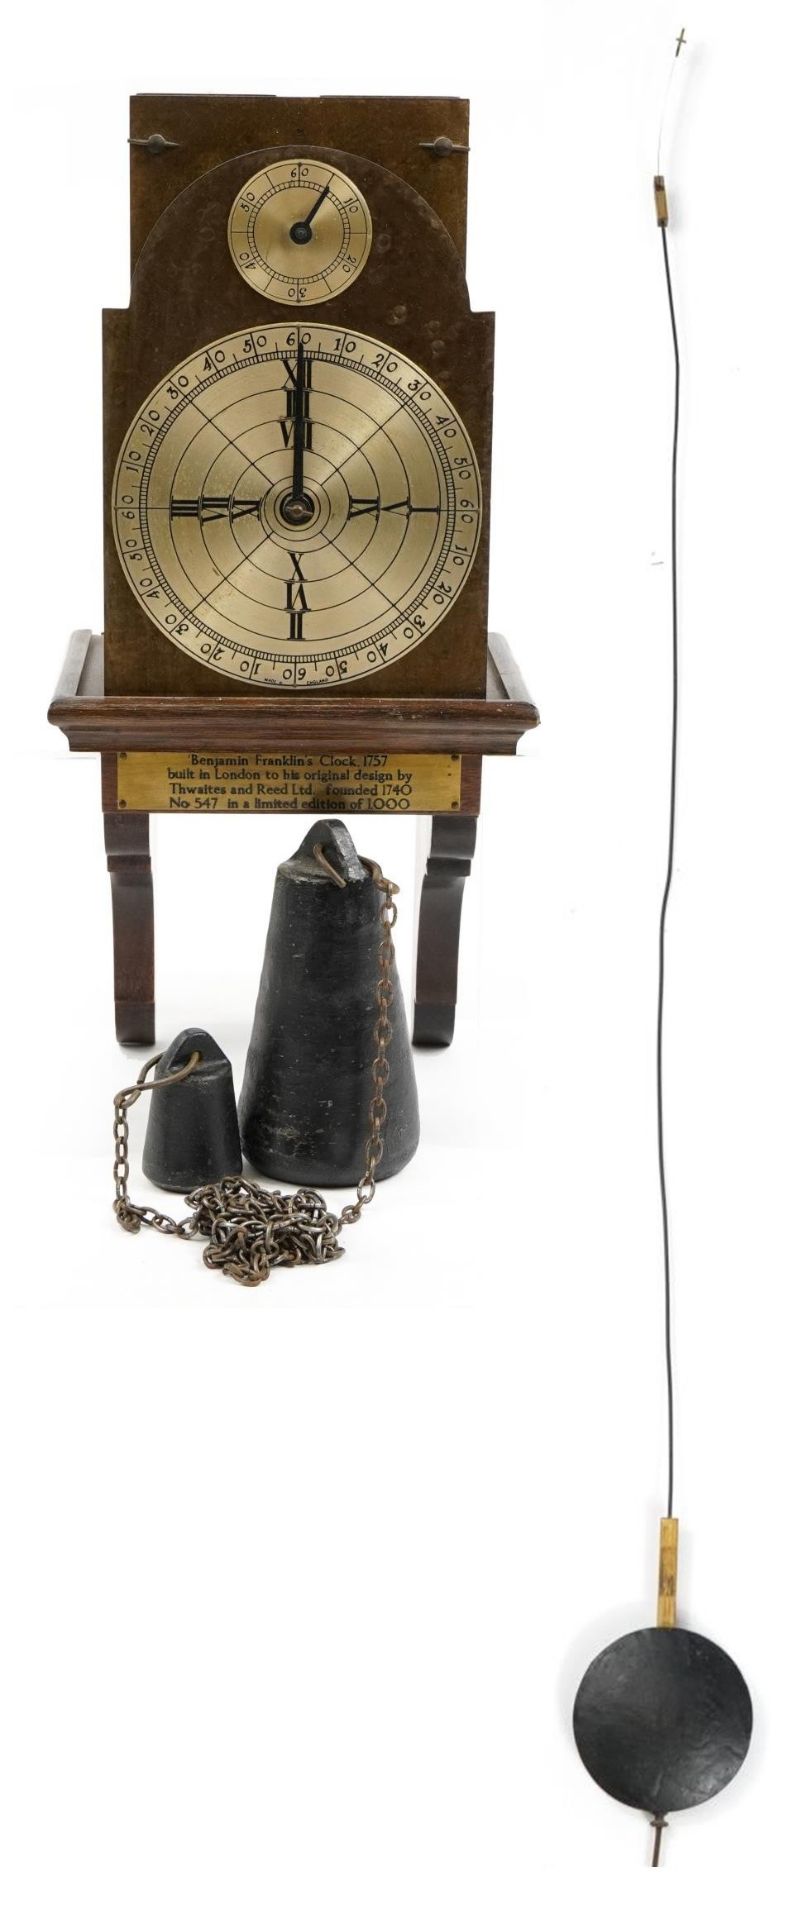 Replica model of Benjamin Franklin's wall clock built in London by Thwaites & Reed Ltd, limited